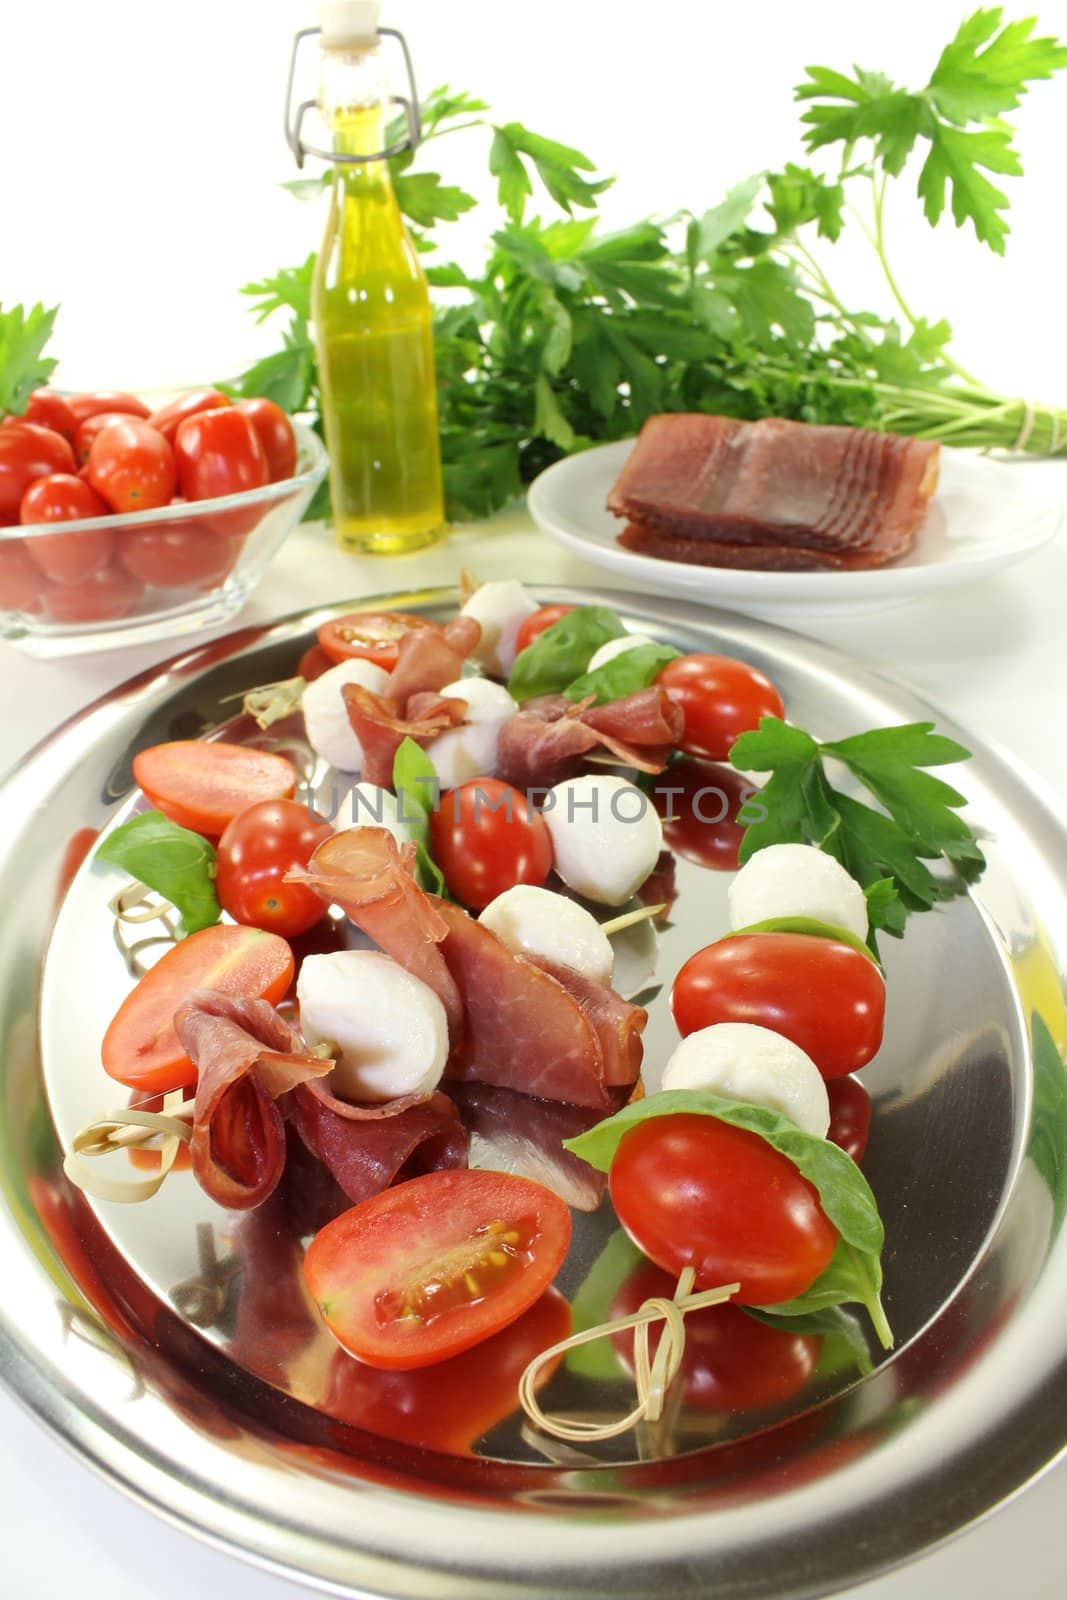 Tomato, mozzarella and ham skewers with basil on a light background